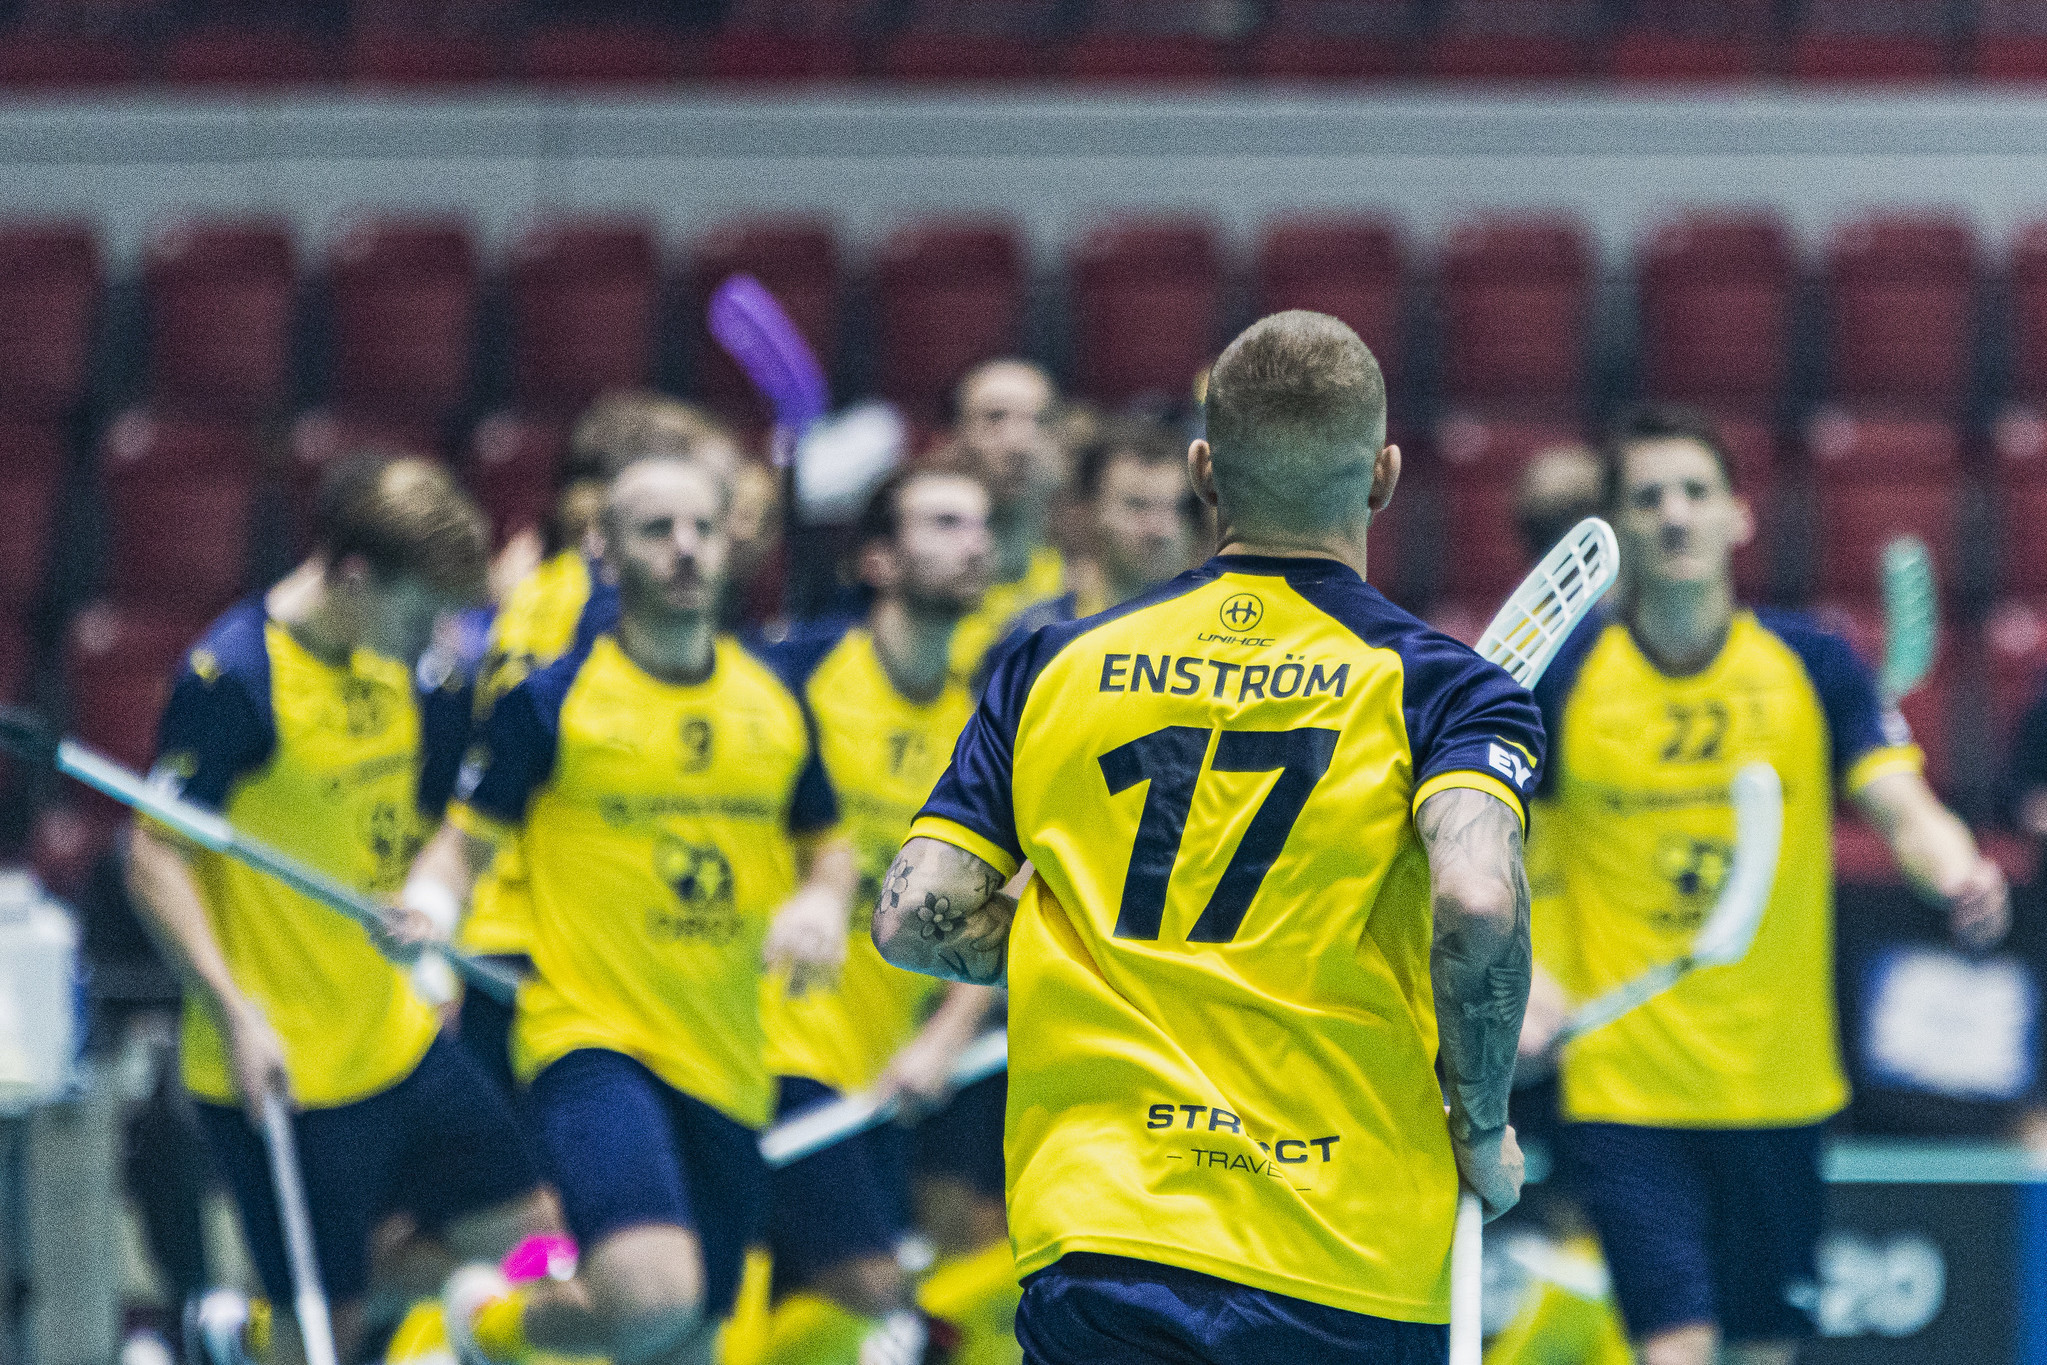 Sweden beat Latvia in their opening match of the tournament ©IFF